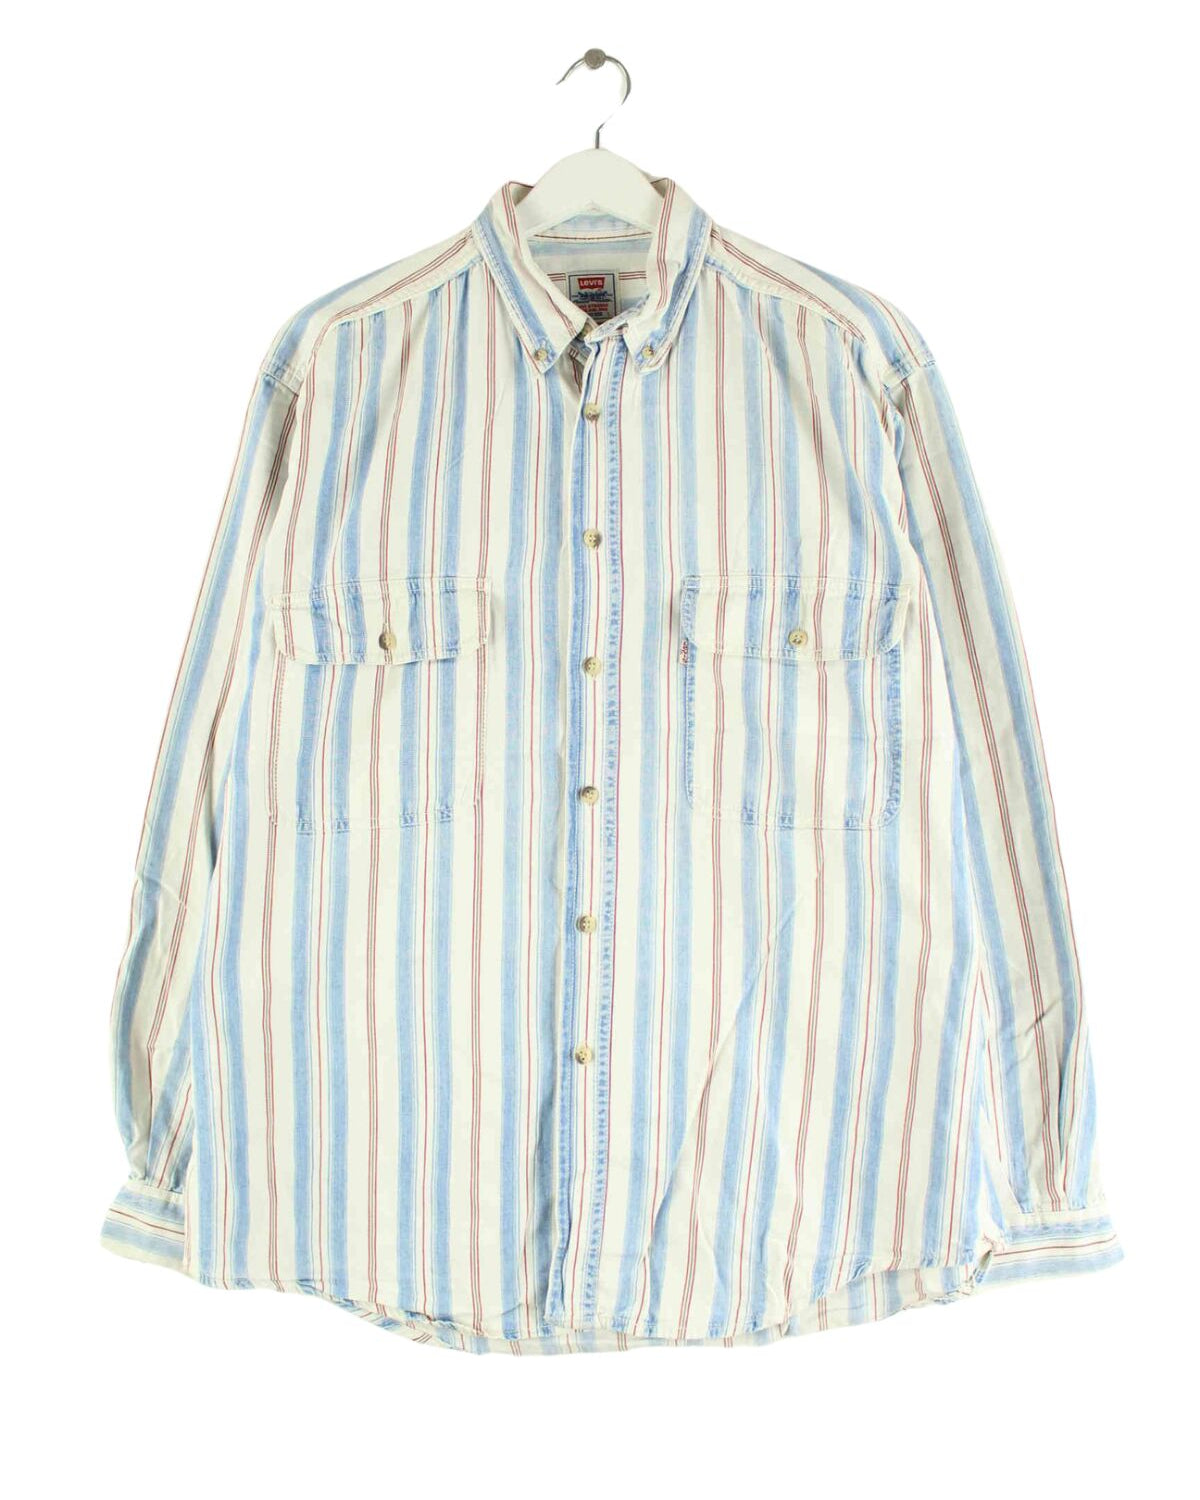 Levi's 90s Vintage Striped White Tab Hemd Weiß L (front image)